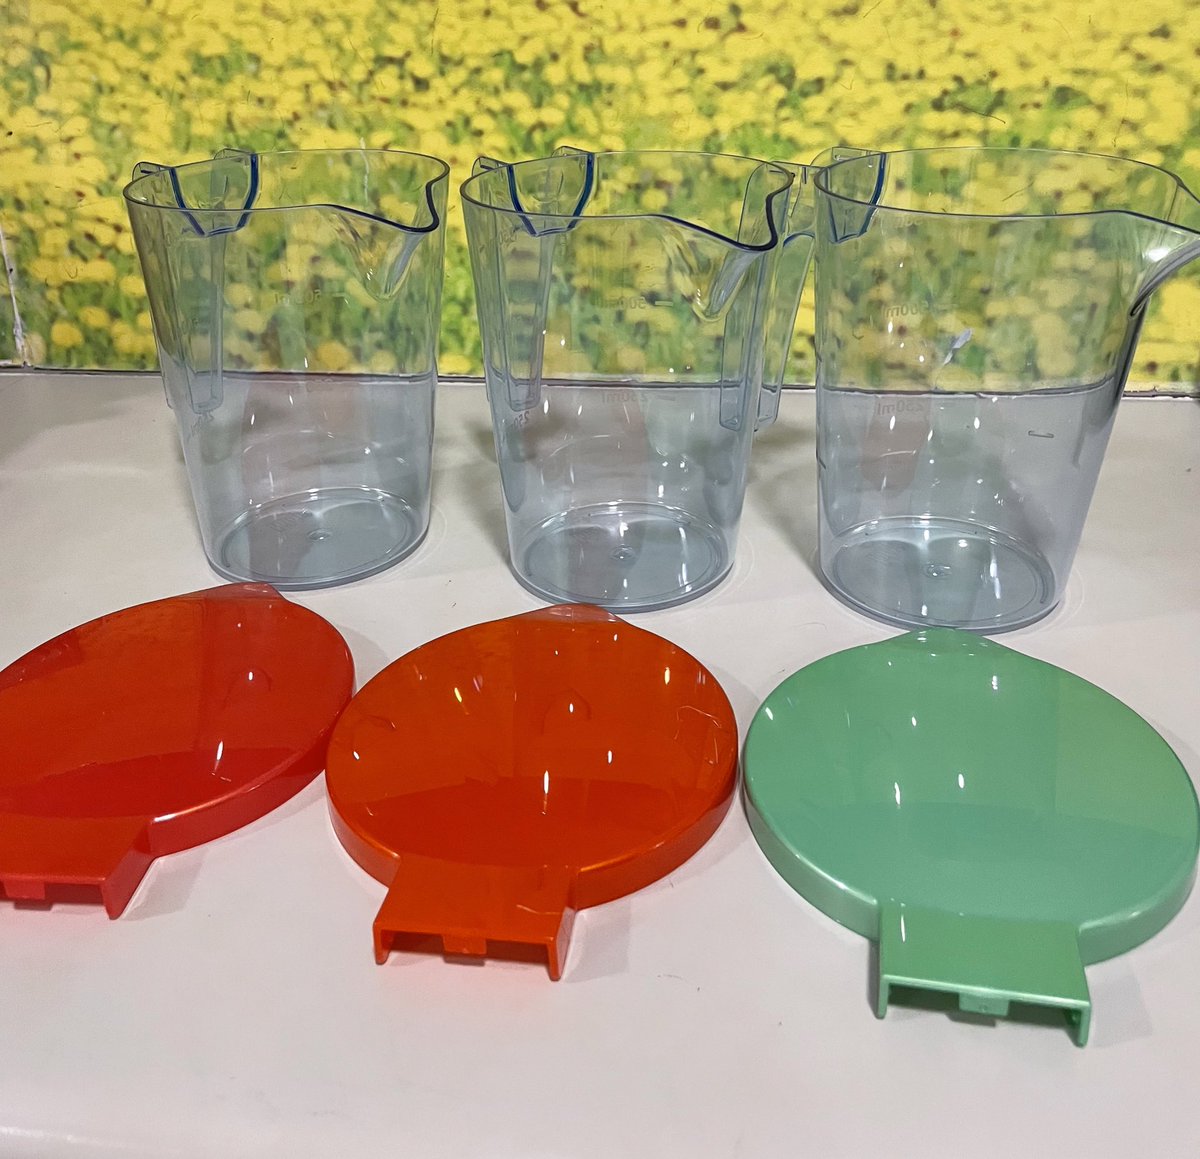 Red ❤️ Amber 🧡 Green 💚 Every day you start with a water jug with a red lid, drink all of that swap to amber, drink all of that swap to a green lid. This way staff know if by afternoon you are still on a red lid to push fluids. Simple and oh so effective 🙌